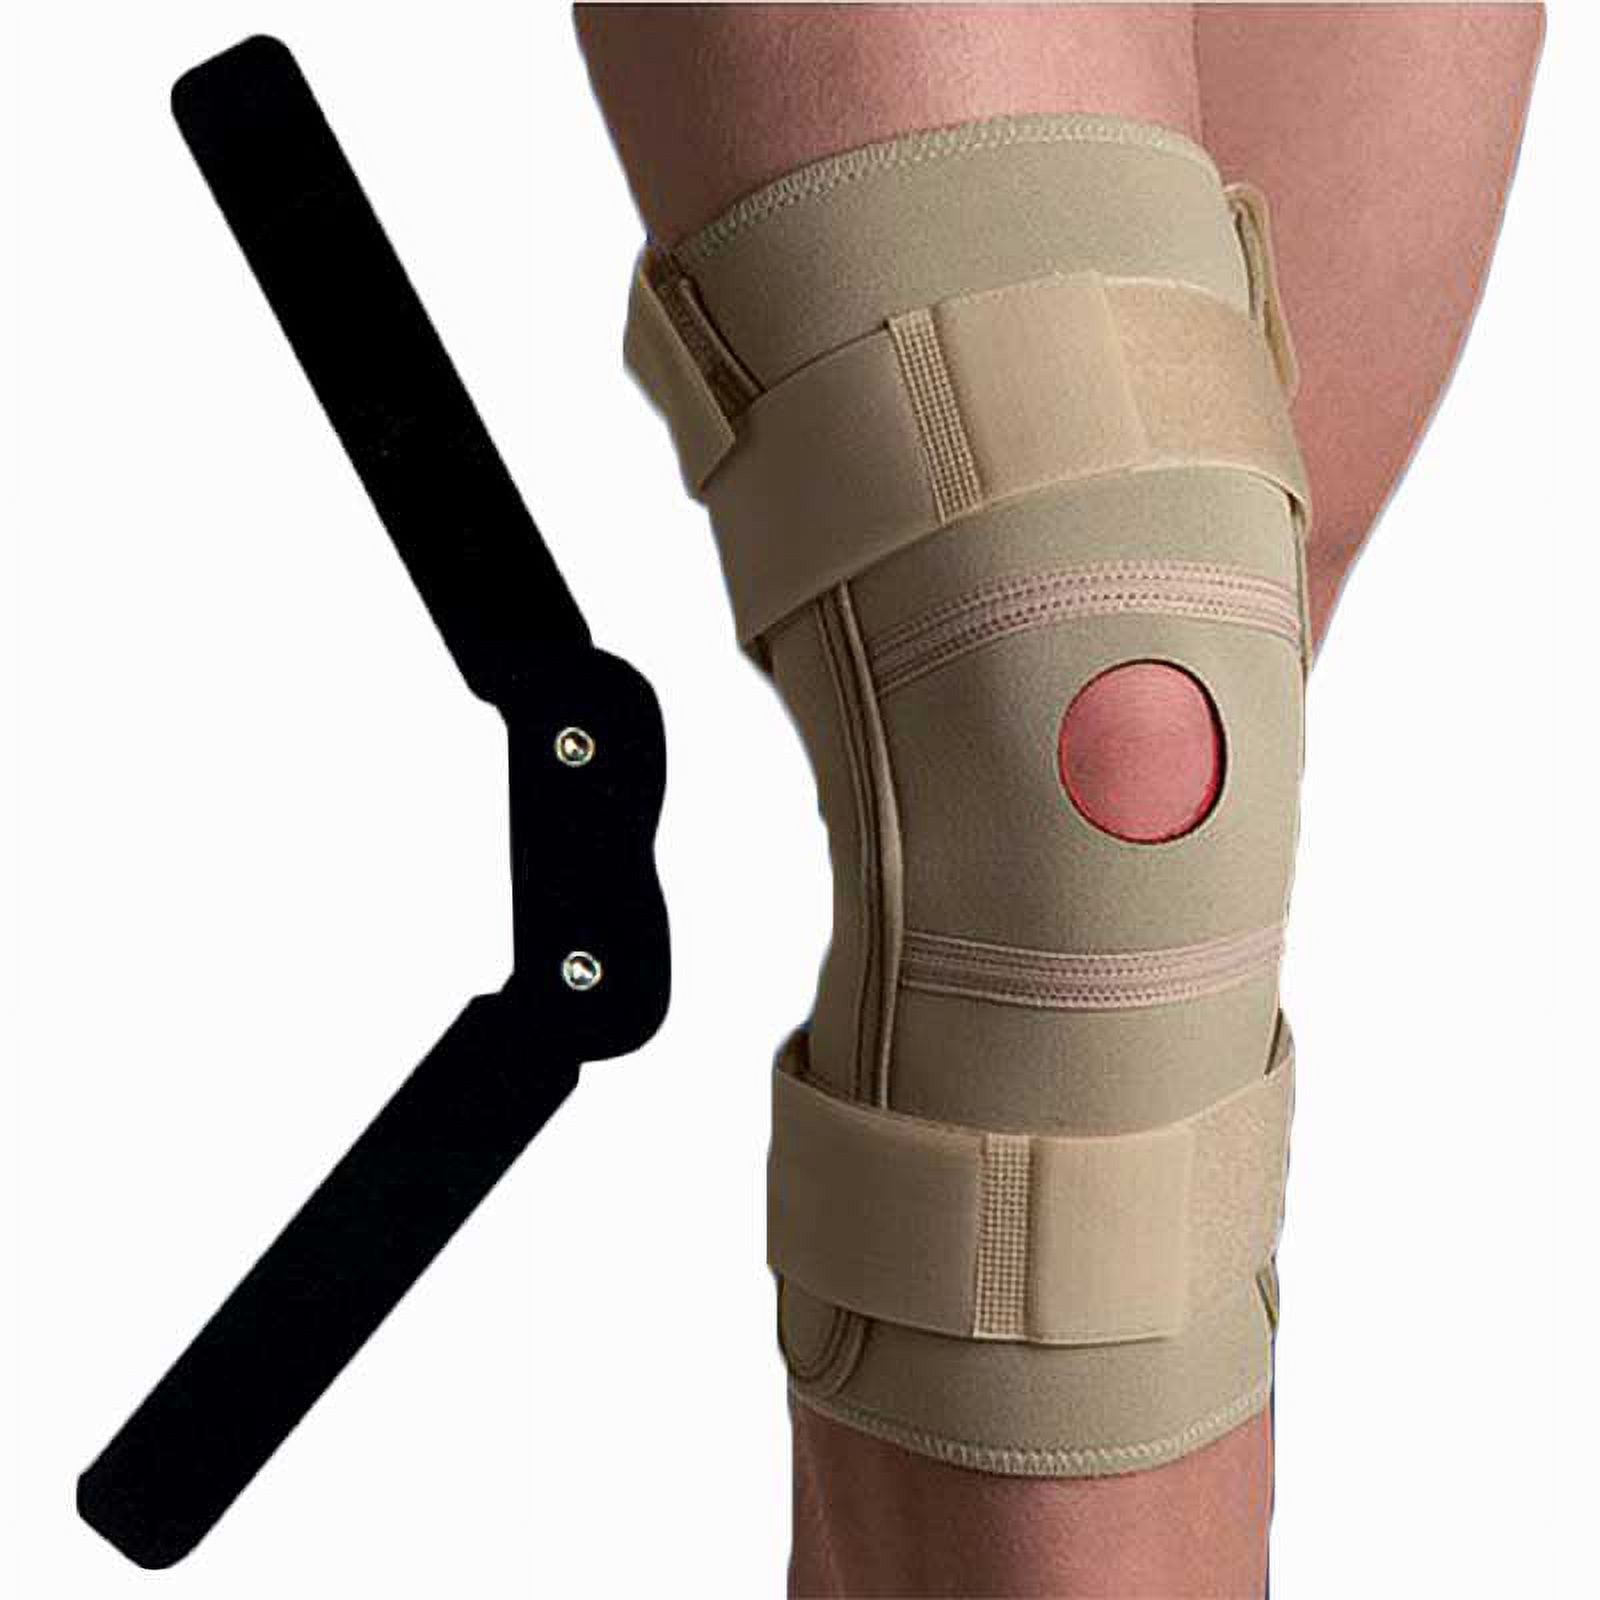 NEW Bariatric Open Patella Plus Size Hinged Knee Brace for Men and Women